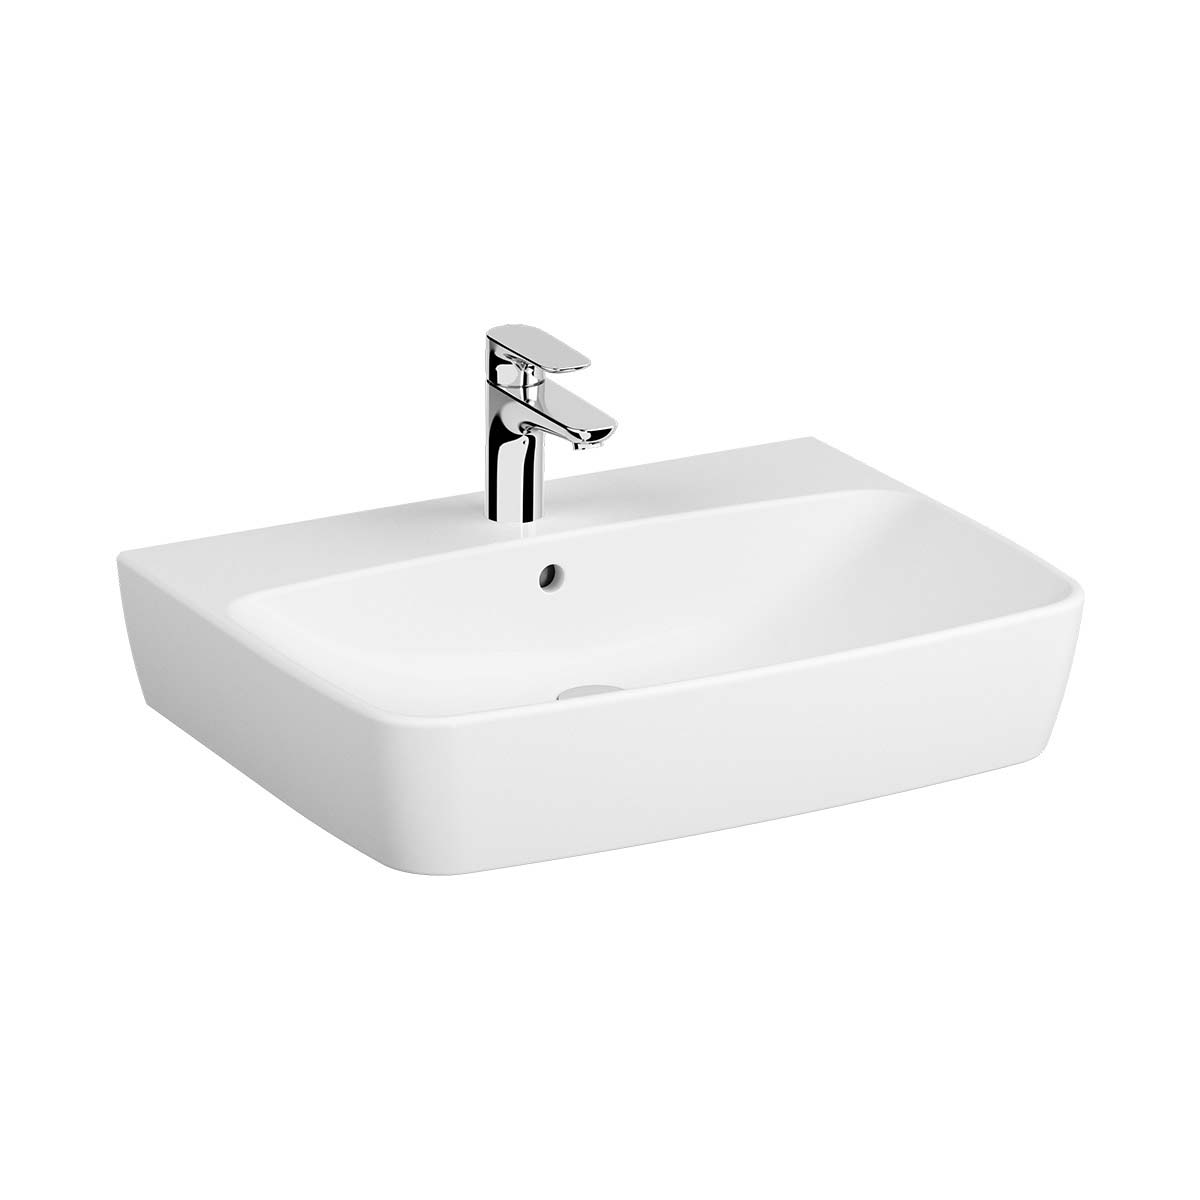 Washbasin, 65 cm, One Tap Hole, With Overflow Hole, For Countertop Use